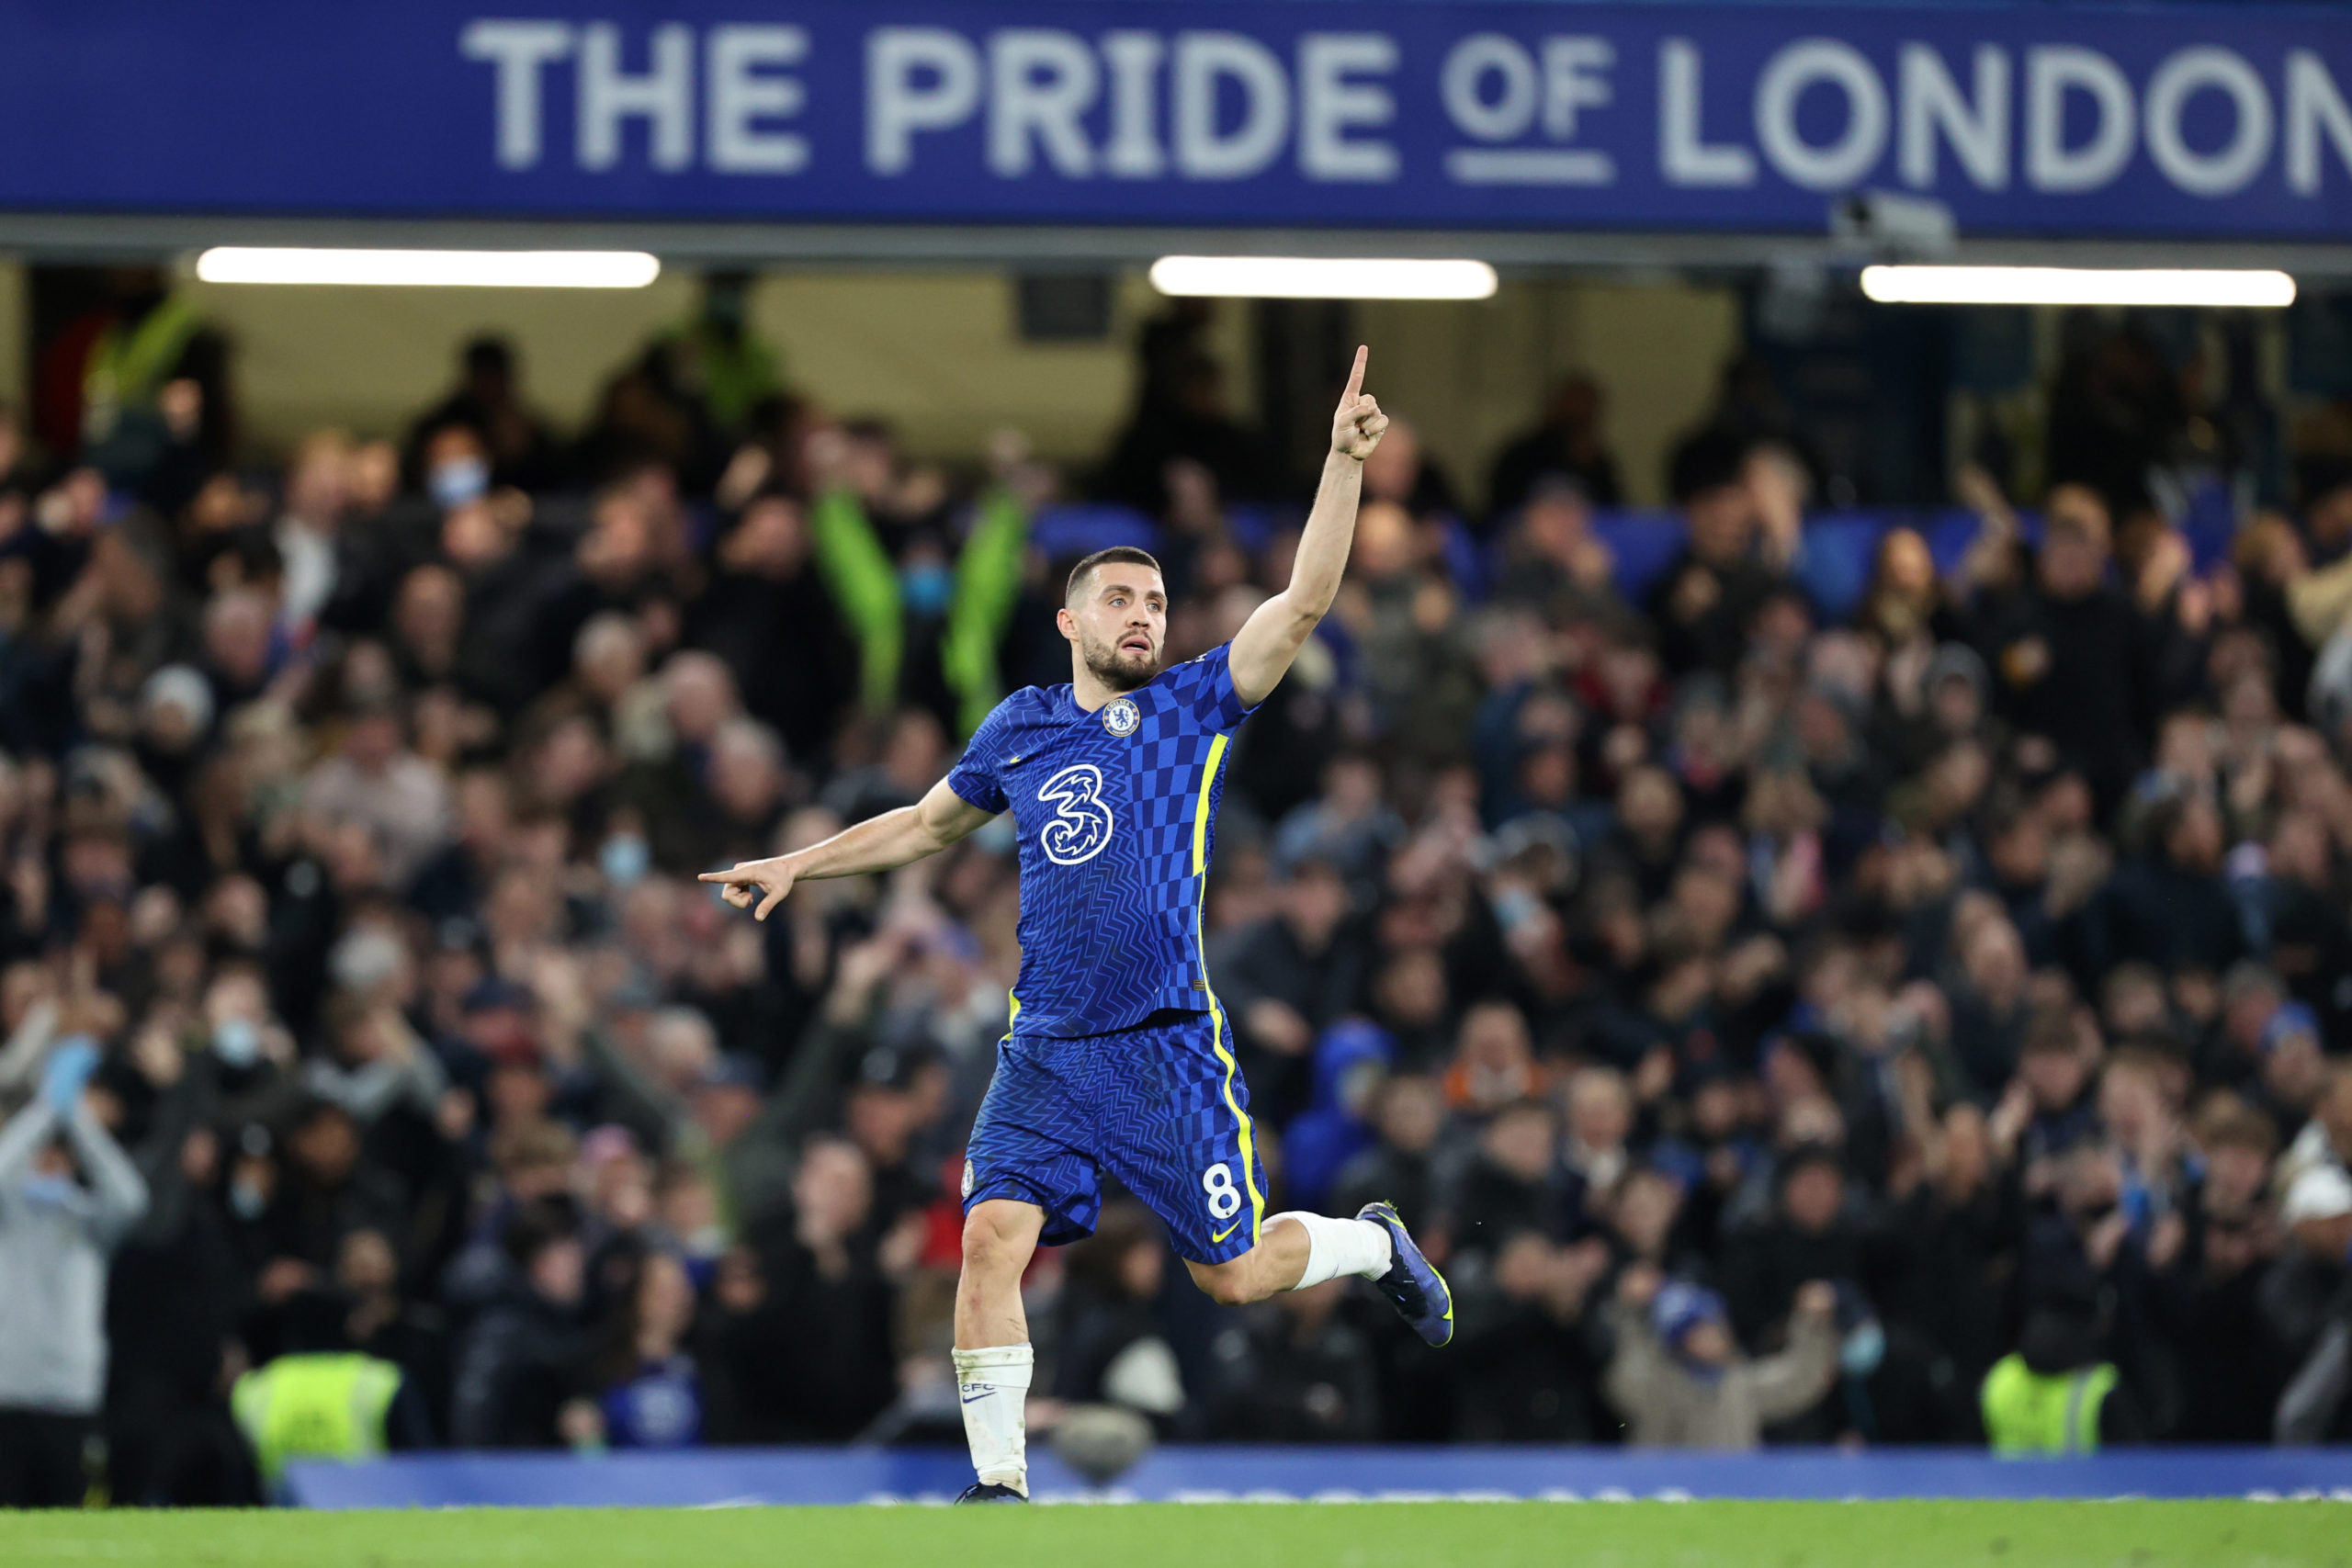 'His work ethic': Martin Keown says £40m Chelsea star doesn't get nearly enough credit